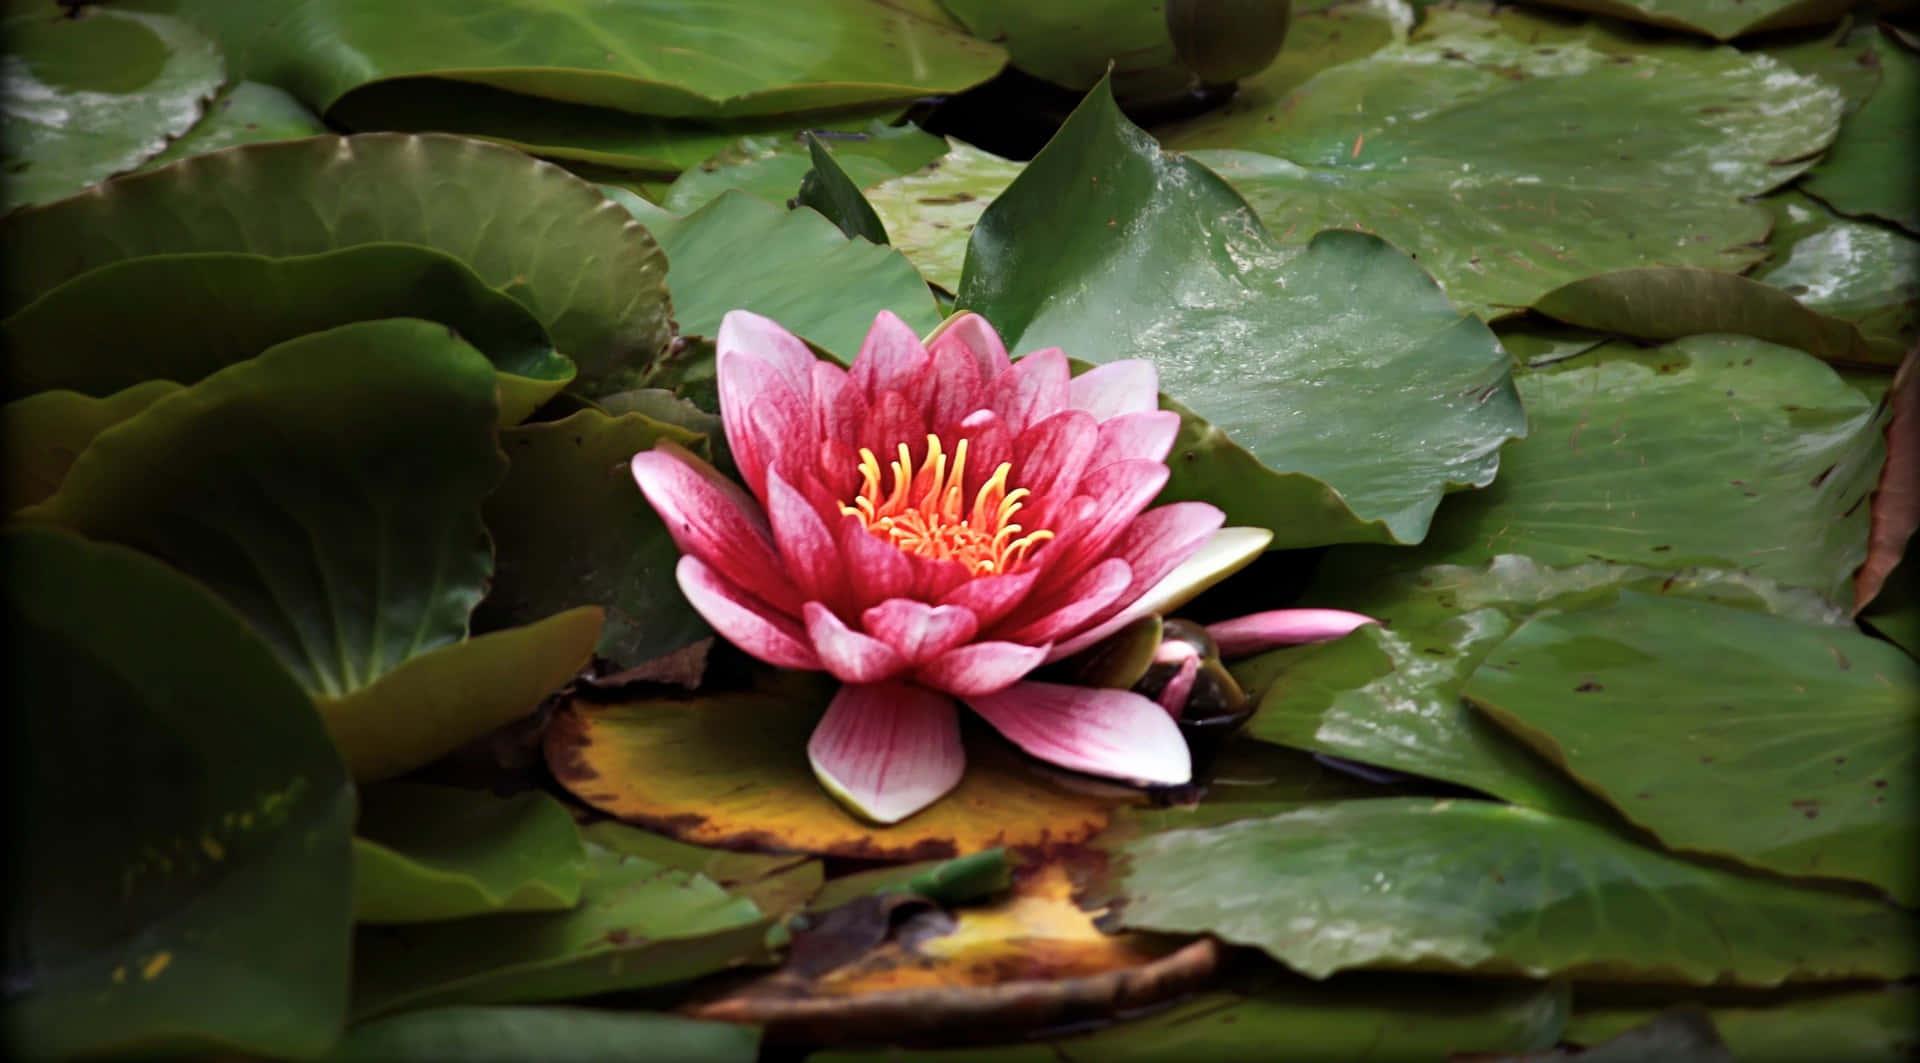 A Pink Water Lily In A Pond With Green Leaves